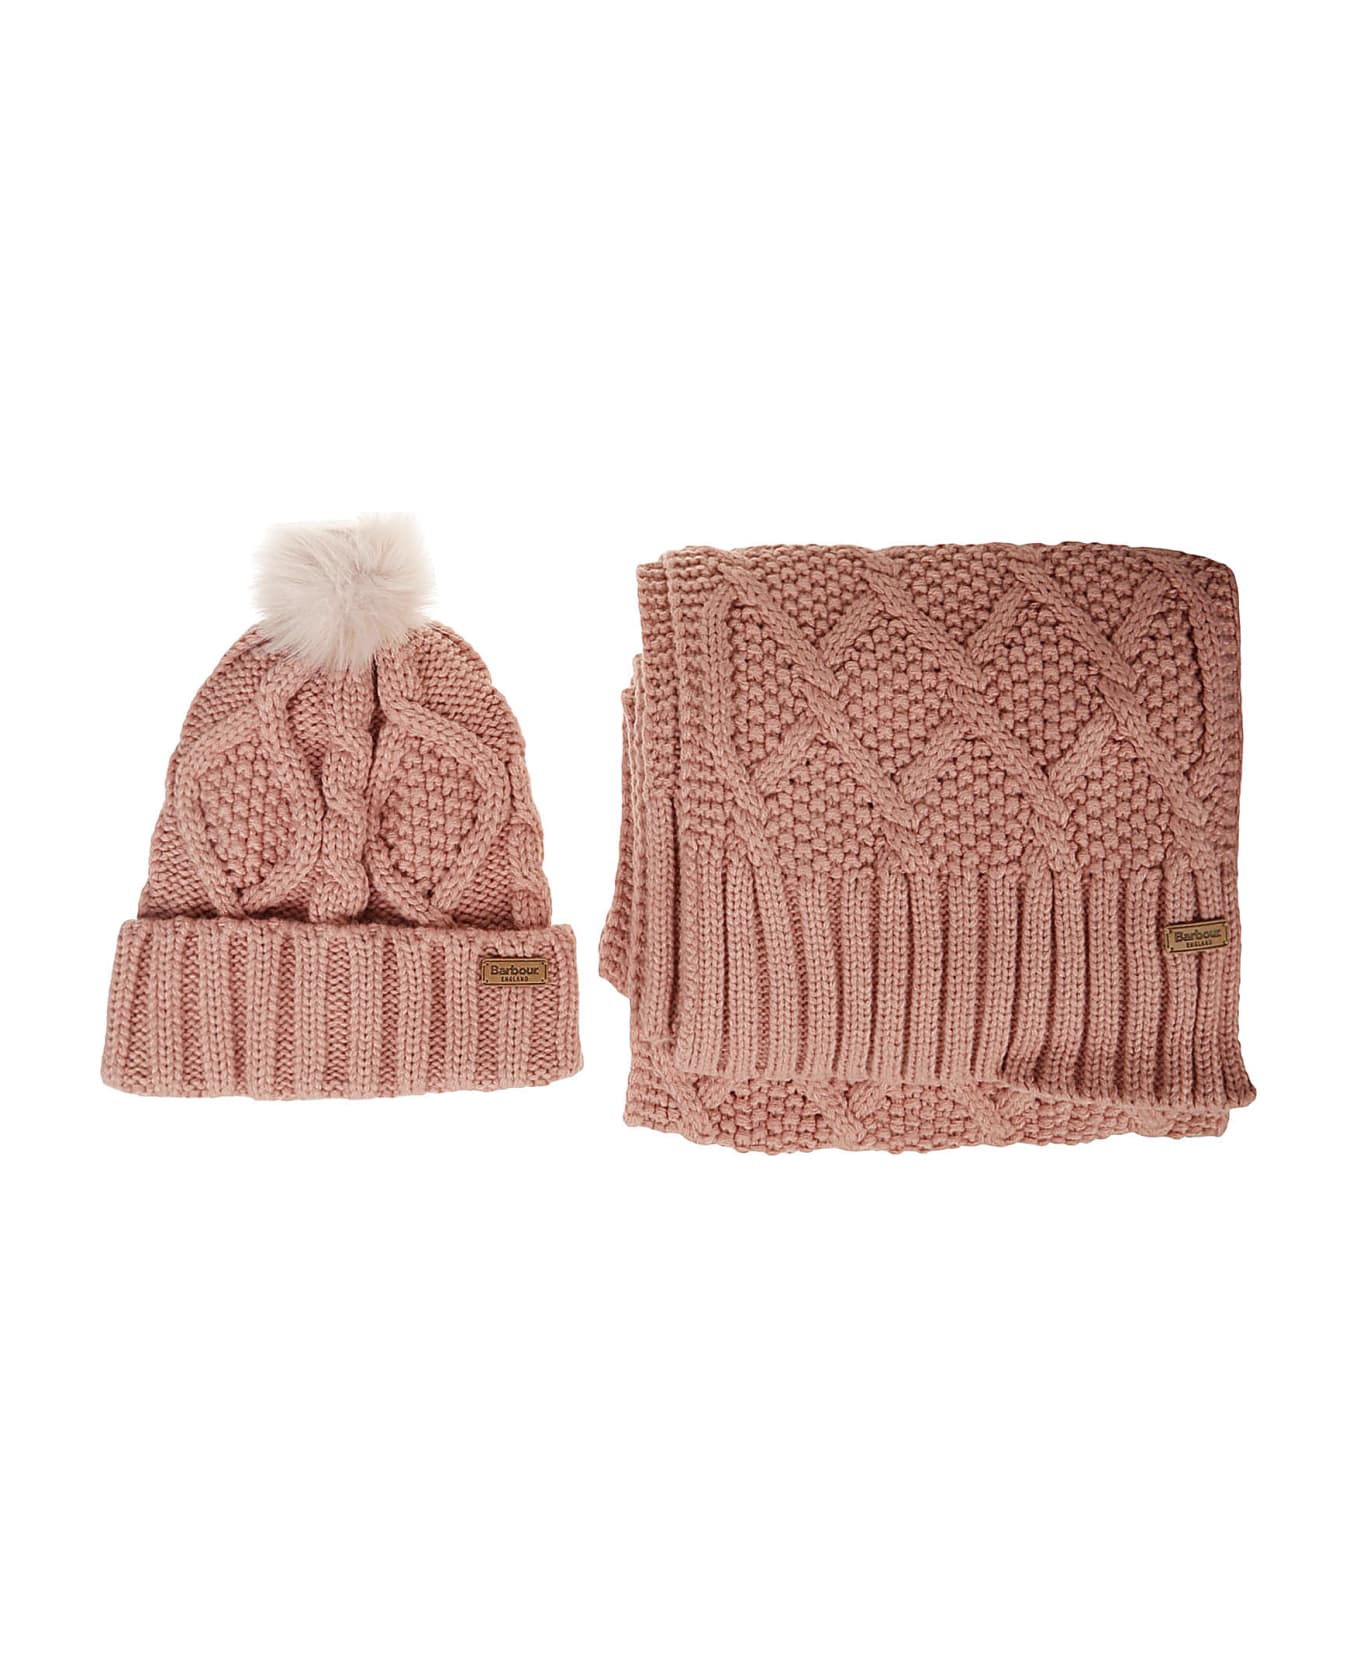 Barbour Ridley Beanie Scarf Gift Set - Dusty Rose